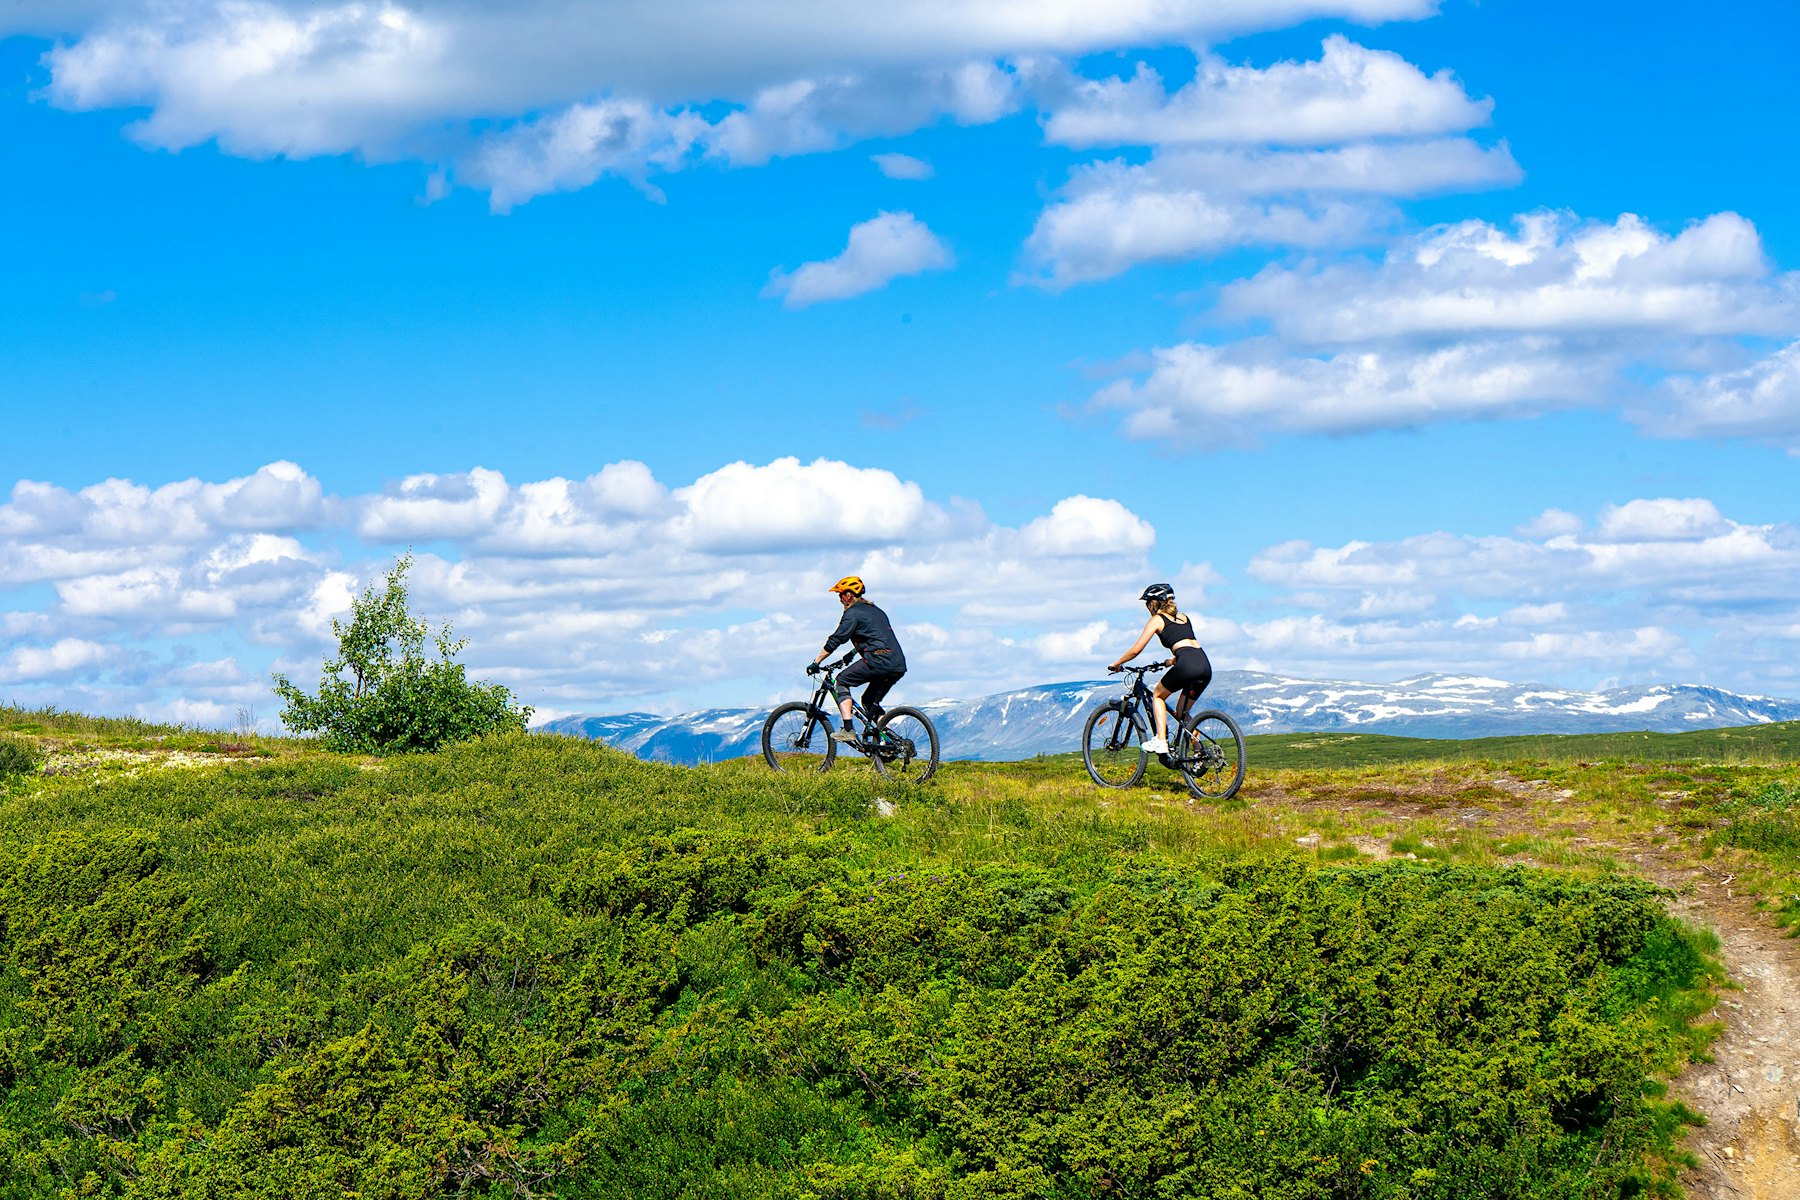 Two people are cycling on a path in the mountains, with several mountains in the background. Photo